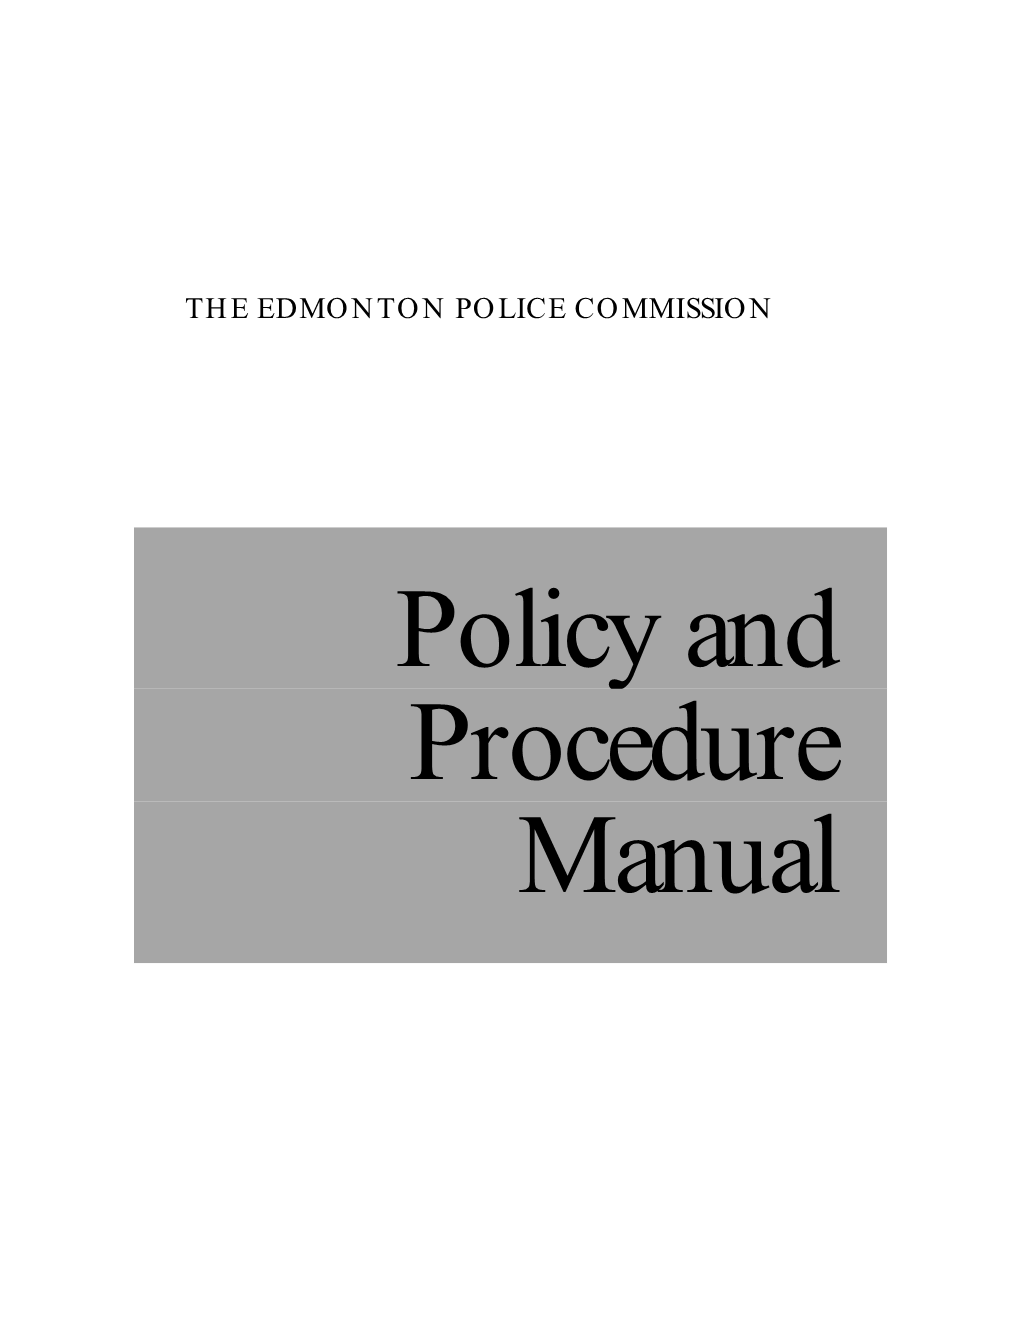 Policy and Procedure Manual EDMONTON POLICE COMMISSION POLICY and PROCEDURE MANUAL